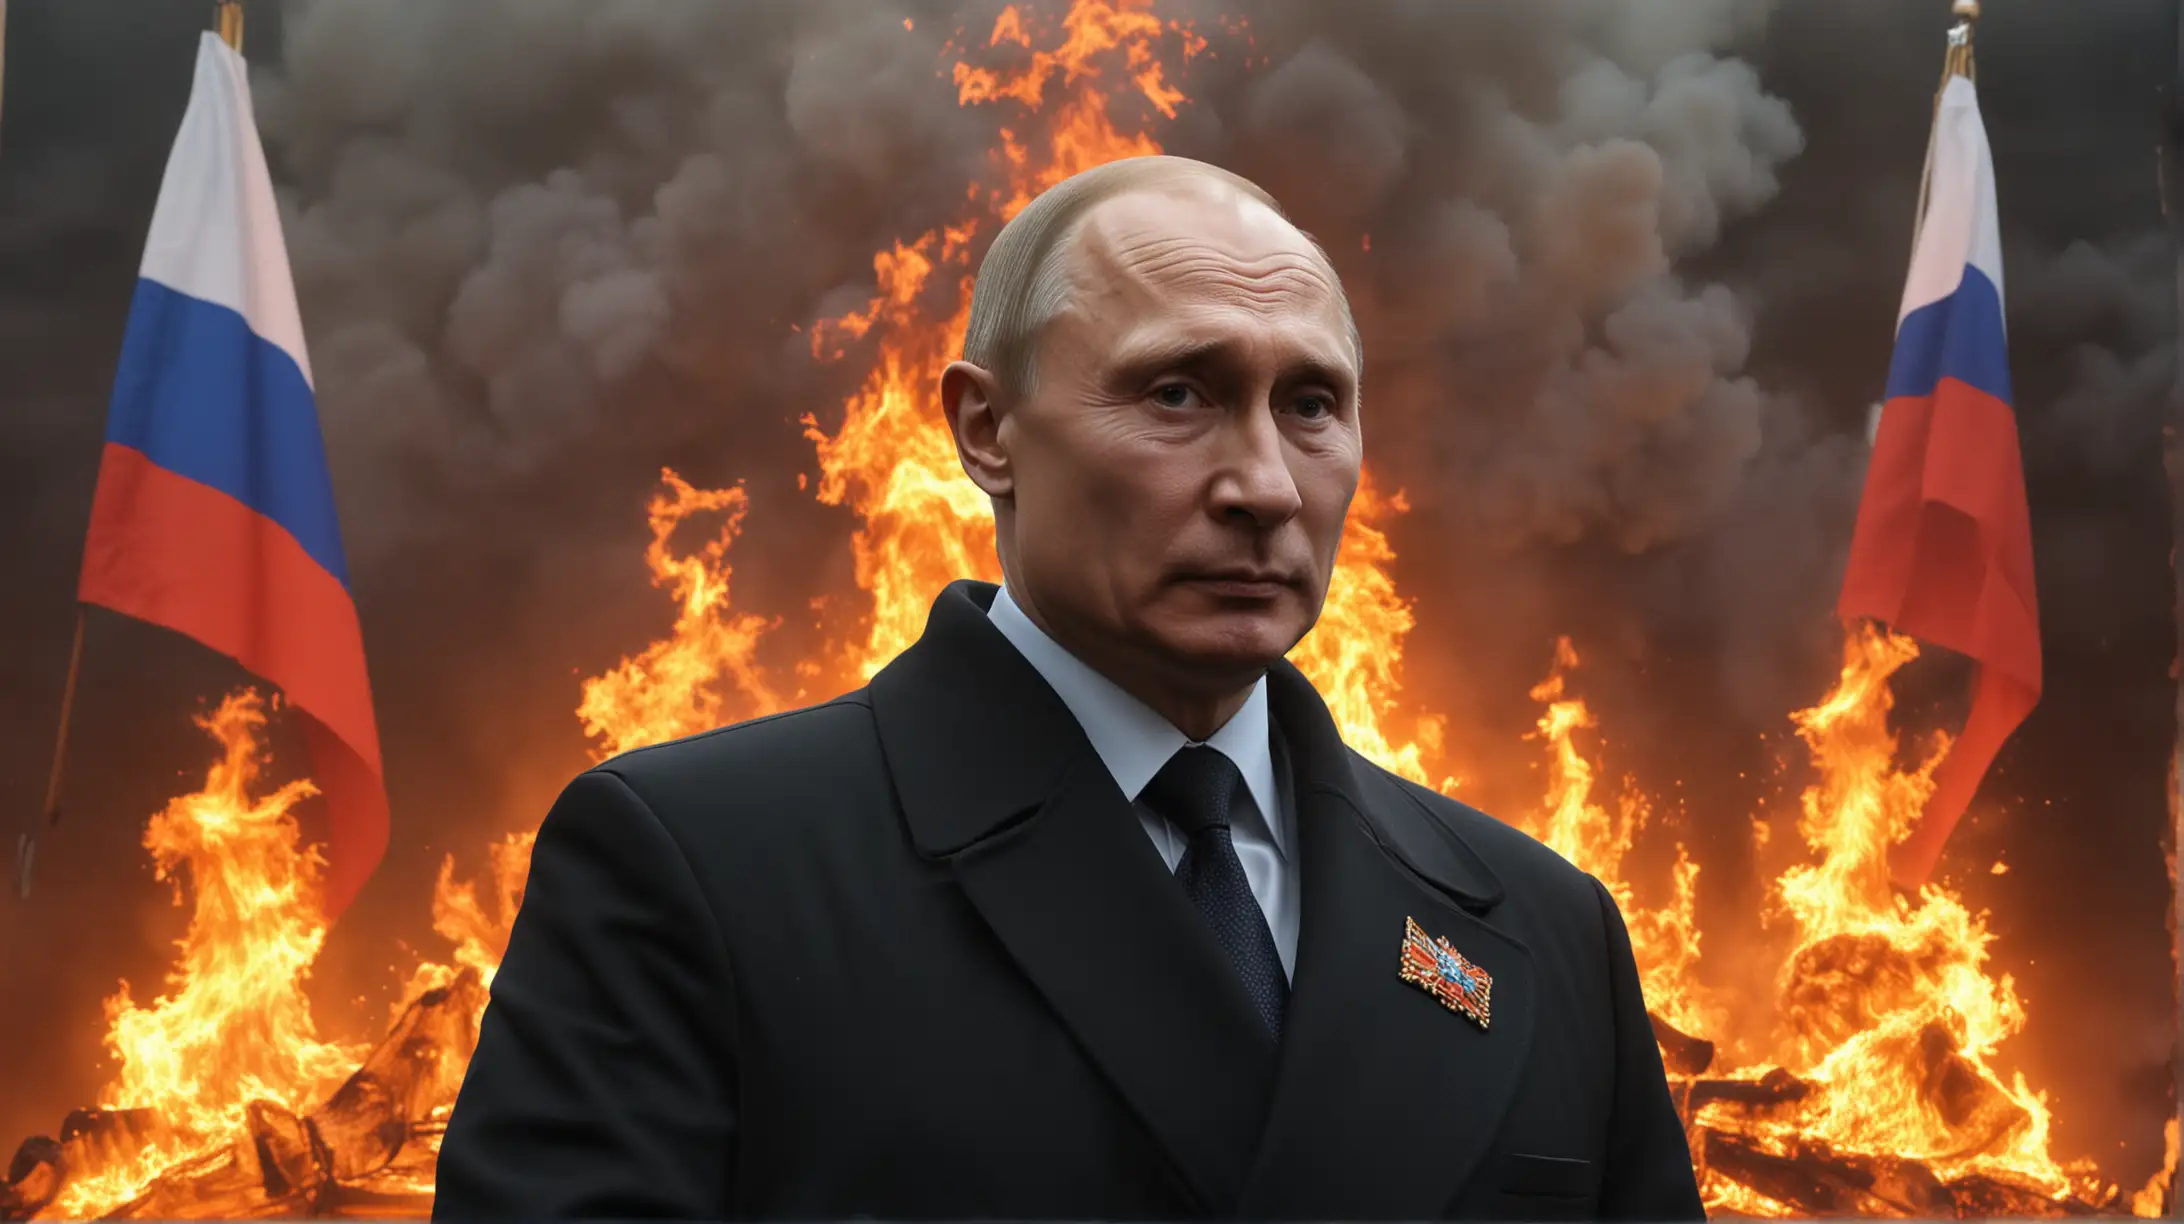 Vladimir Putin Standing Before a Burning Russian Flag with a Sinister Gaze